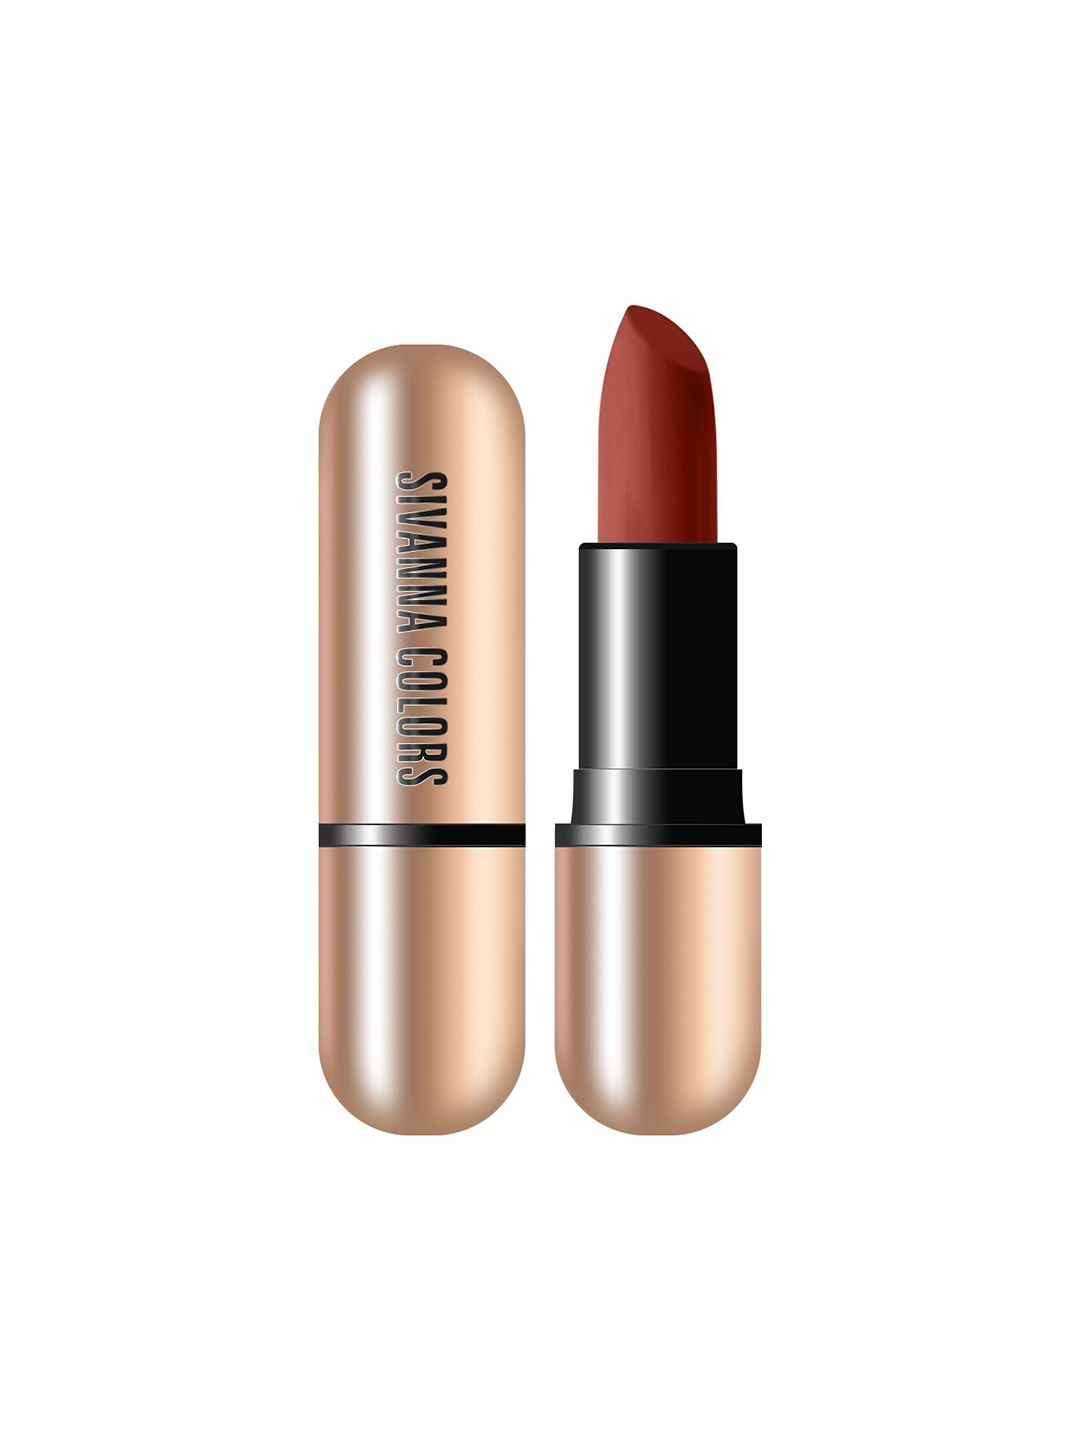 Sivanna Colors Matte Stay Lipstick Kiss Me - HF688 09 Price in India